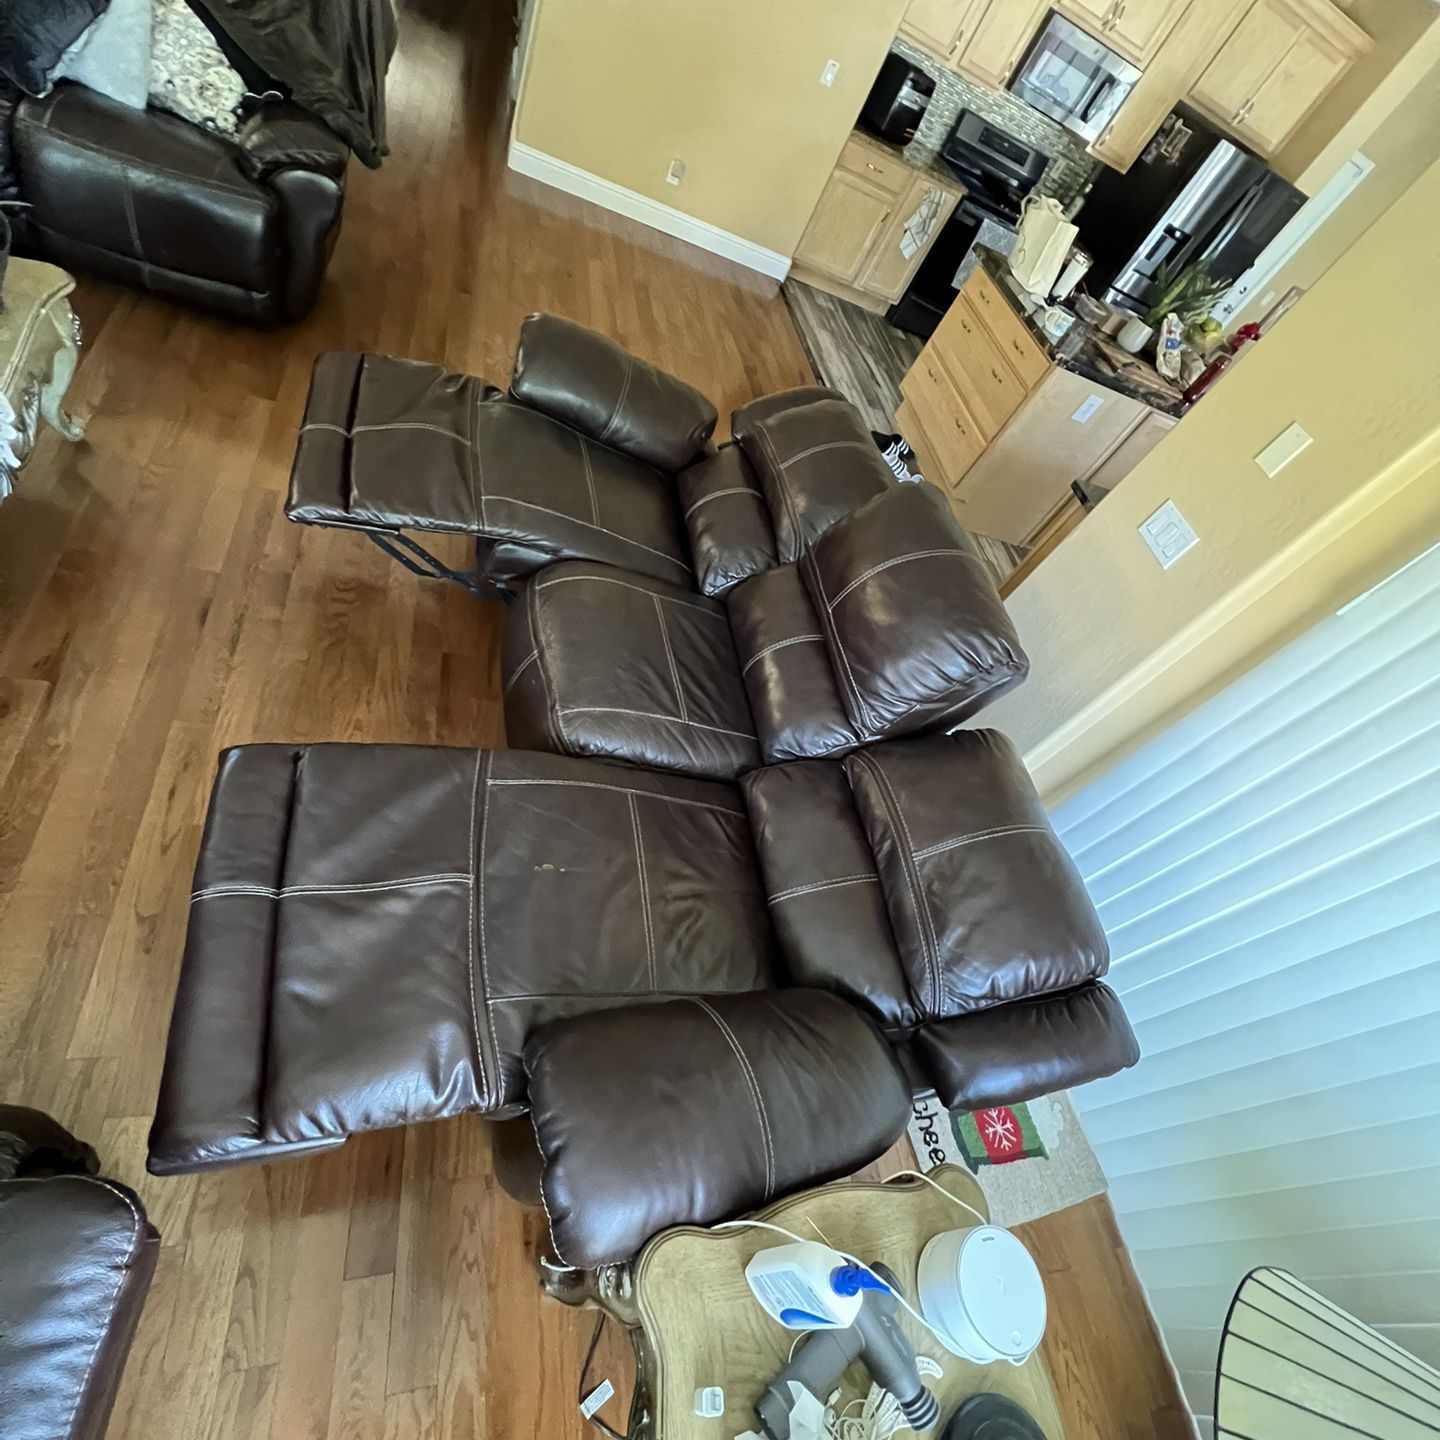 2 Couches -   Brown Leather  Sofa And Loveseat  Power Recliner 